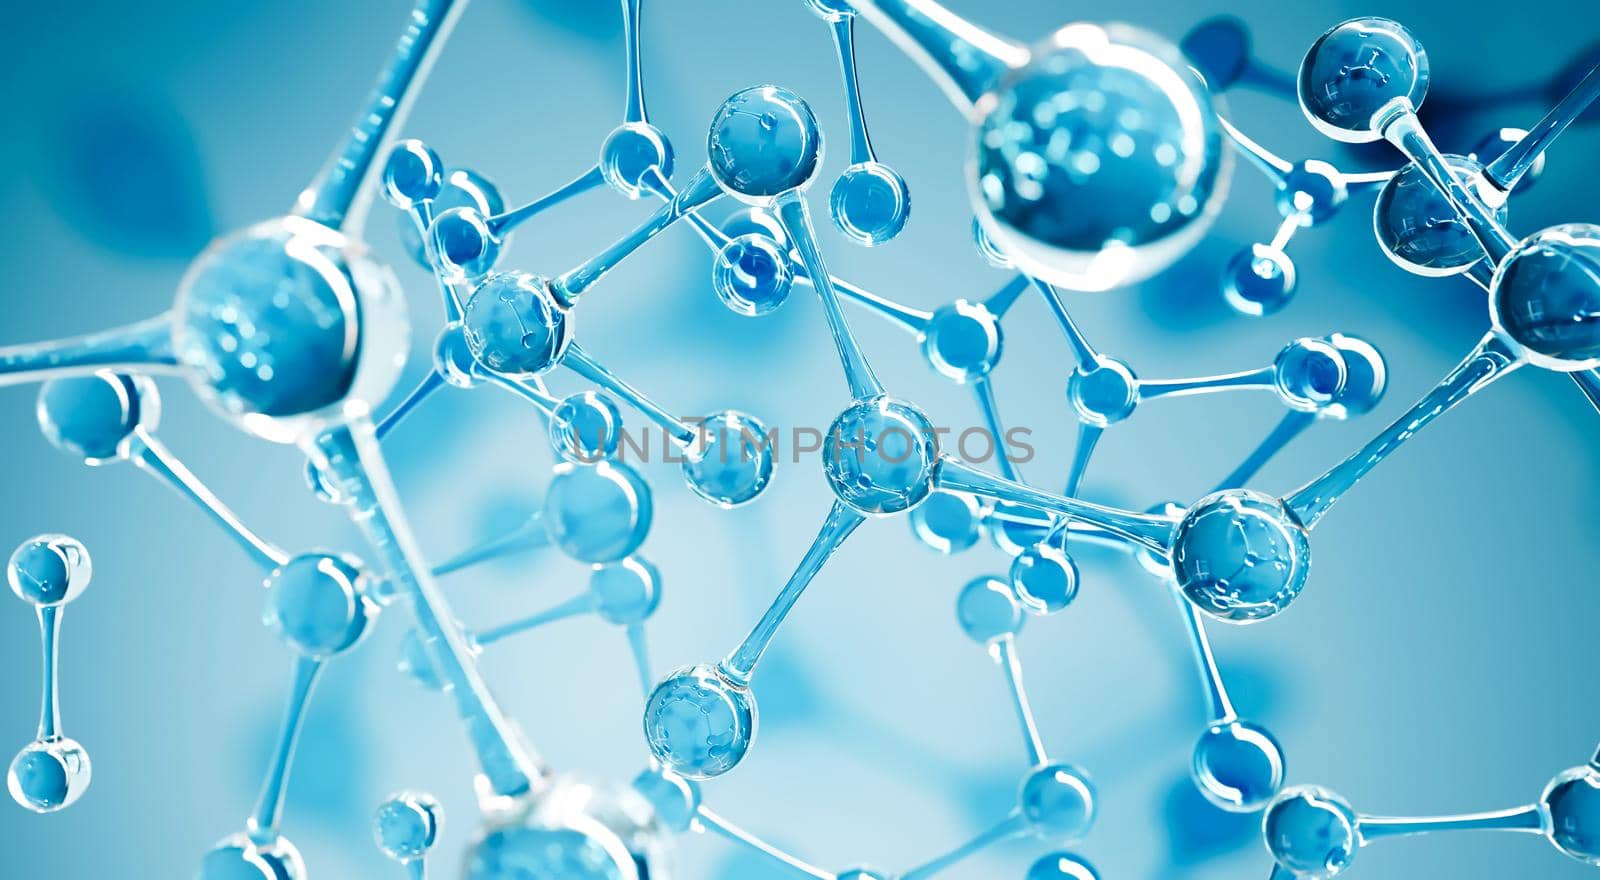 Abstract molecules design. Atoms formula. Abstract dna background for science chemistry banner or flyer. Water or medical background. 3d rendering illustration